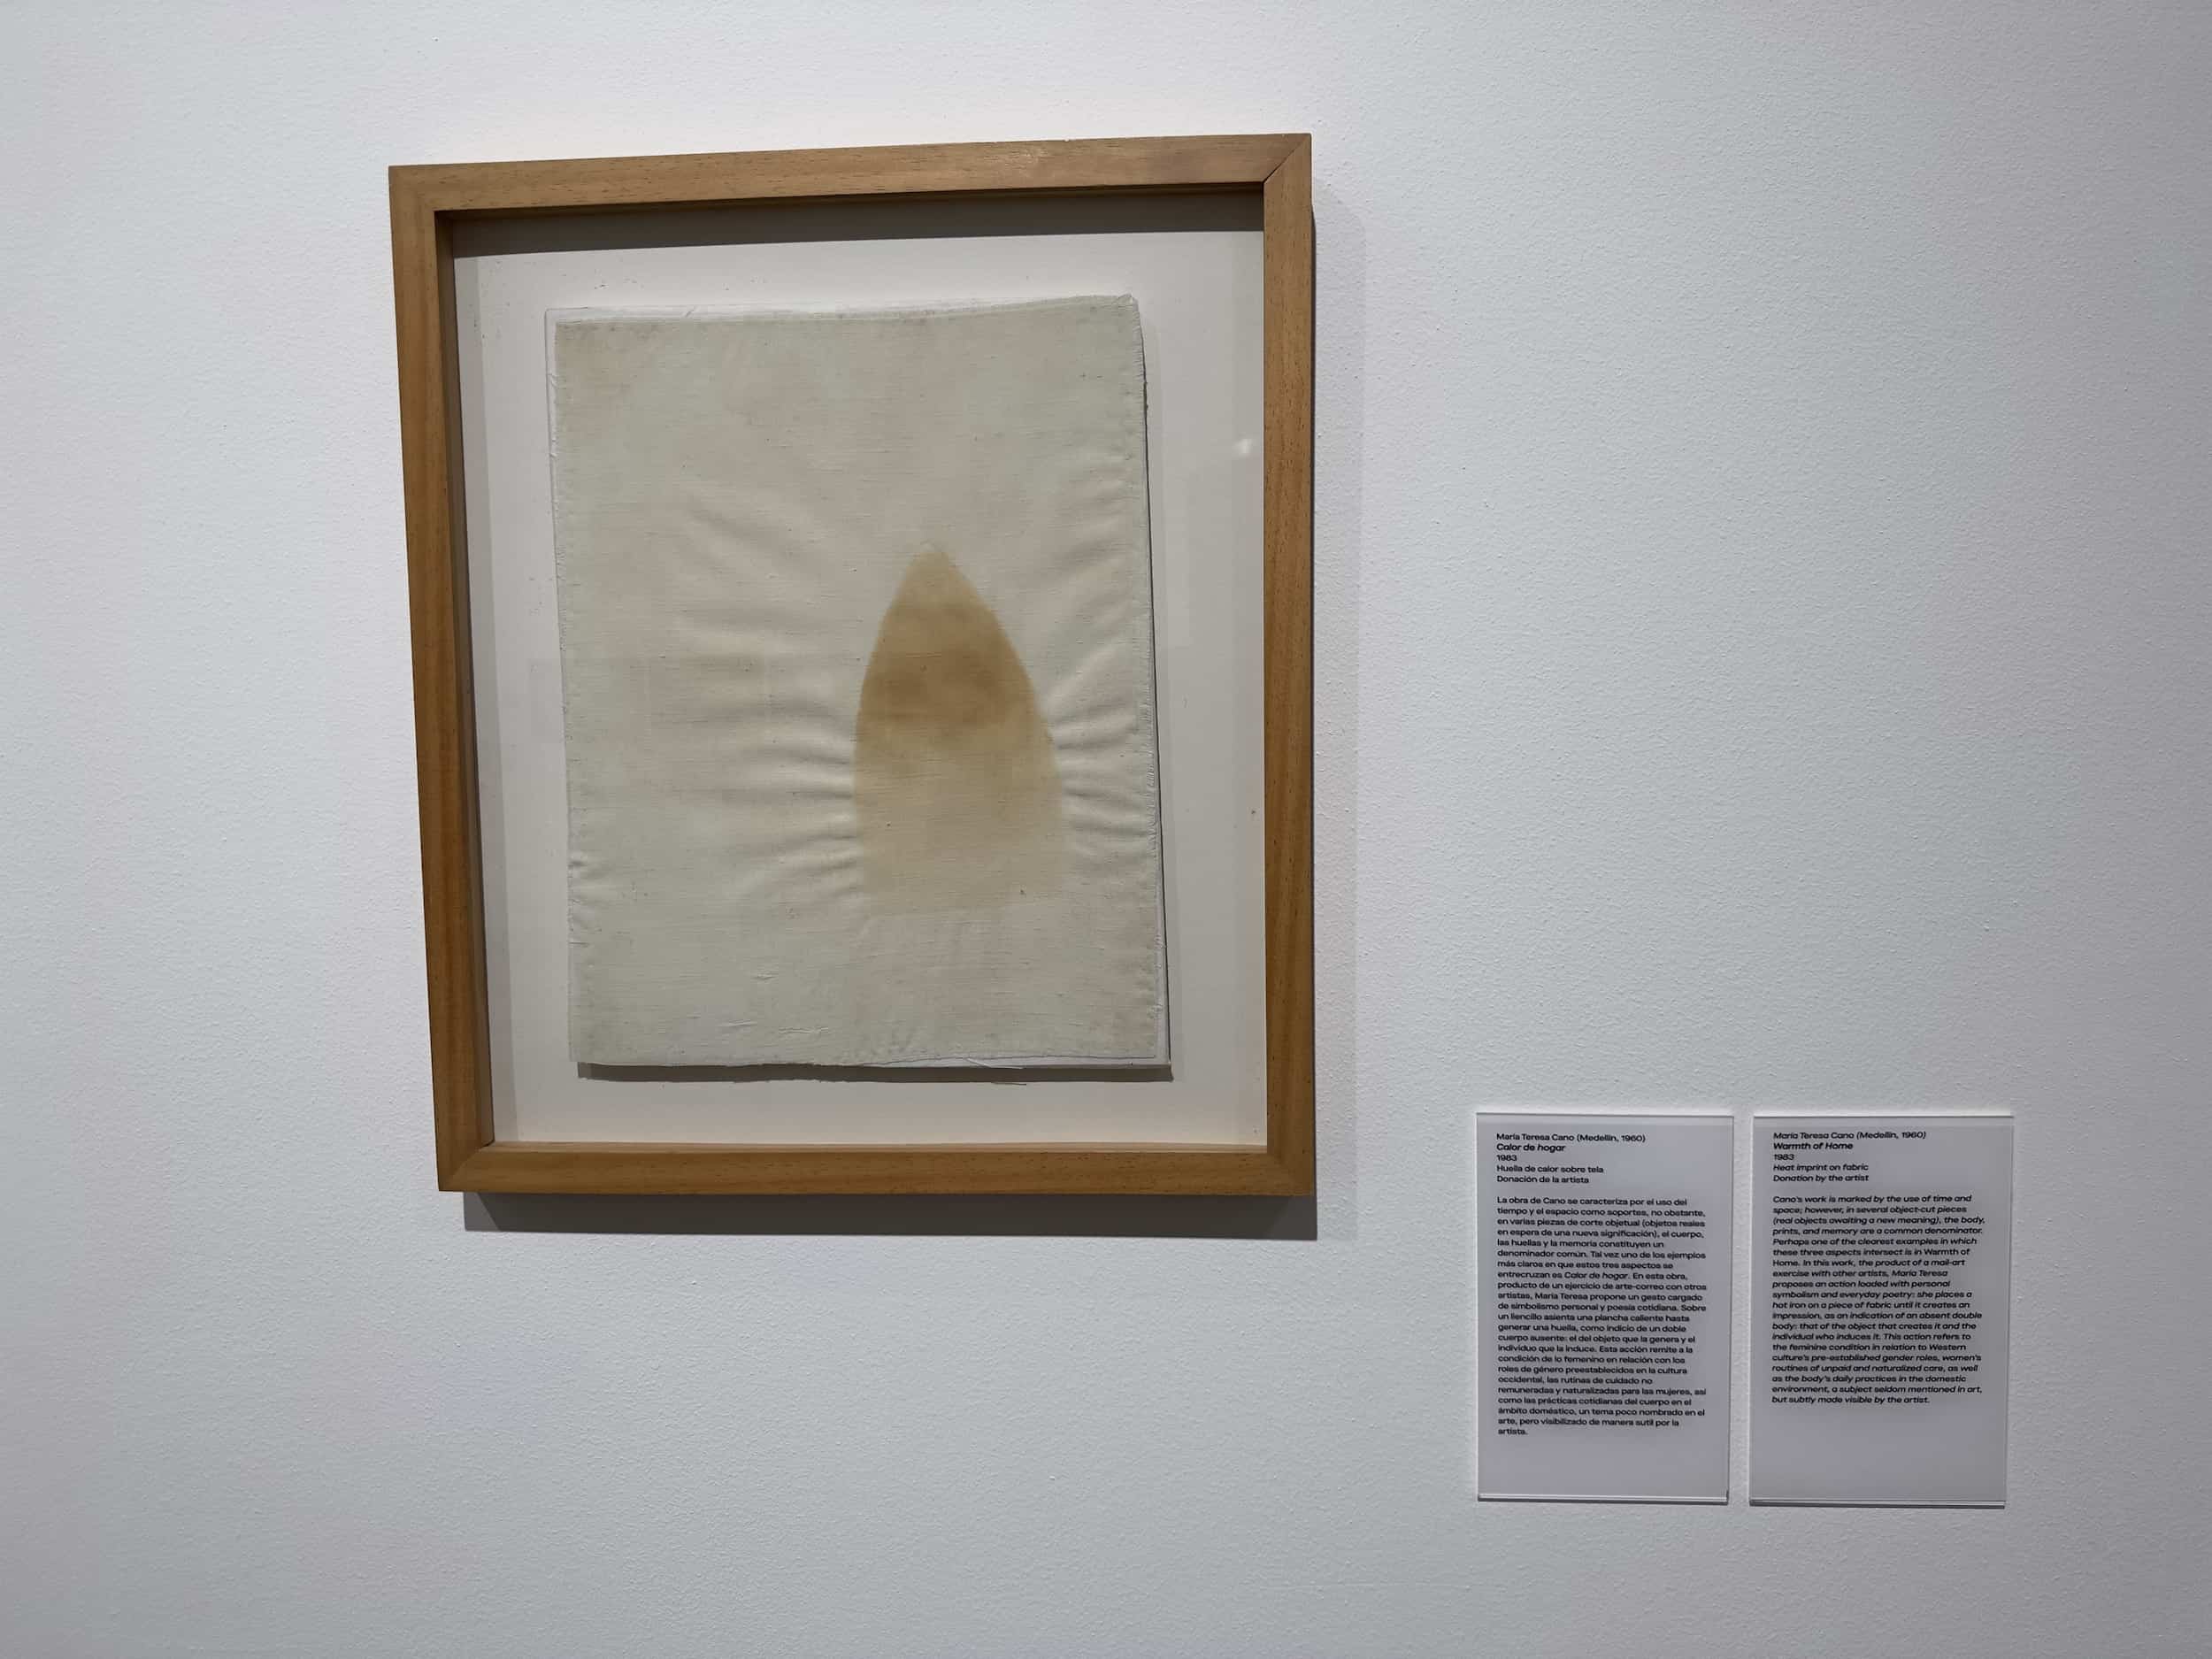 Warmth of Home by María Teresa Cano (1983), heat imprint on fabric at the Medellín Museum of Modern Art in Medellín, Antioquia, Colombia